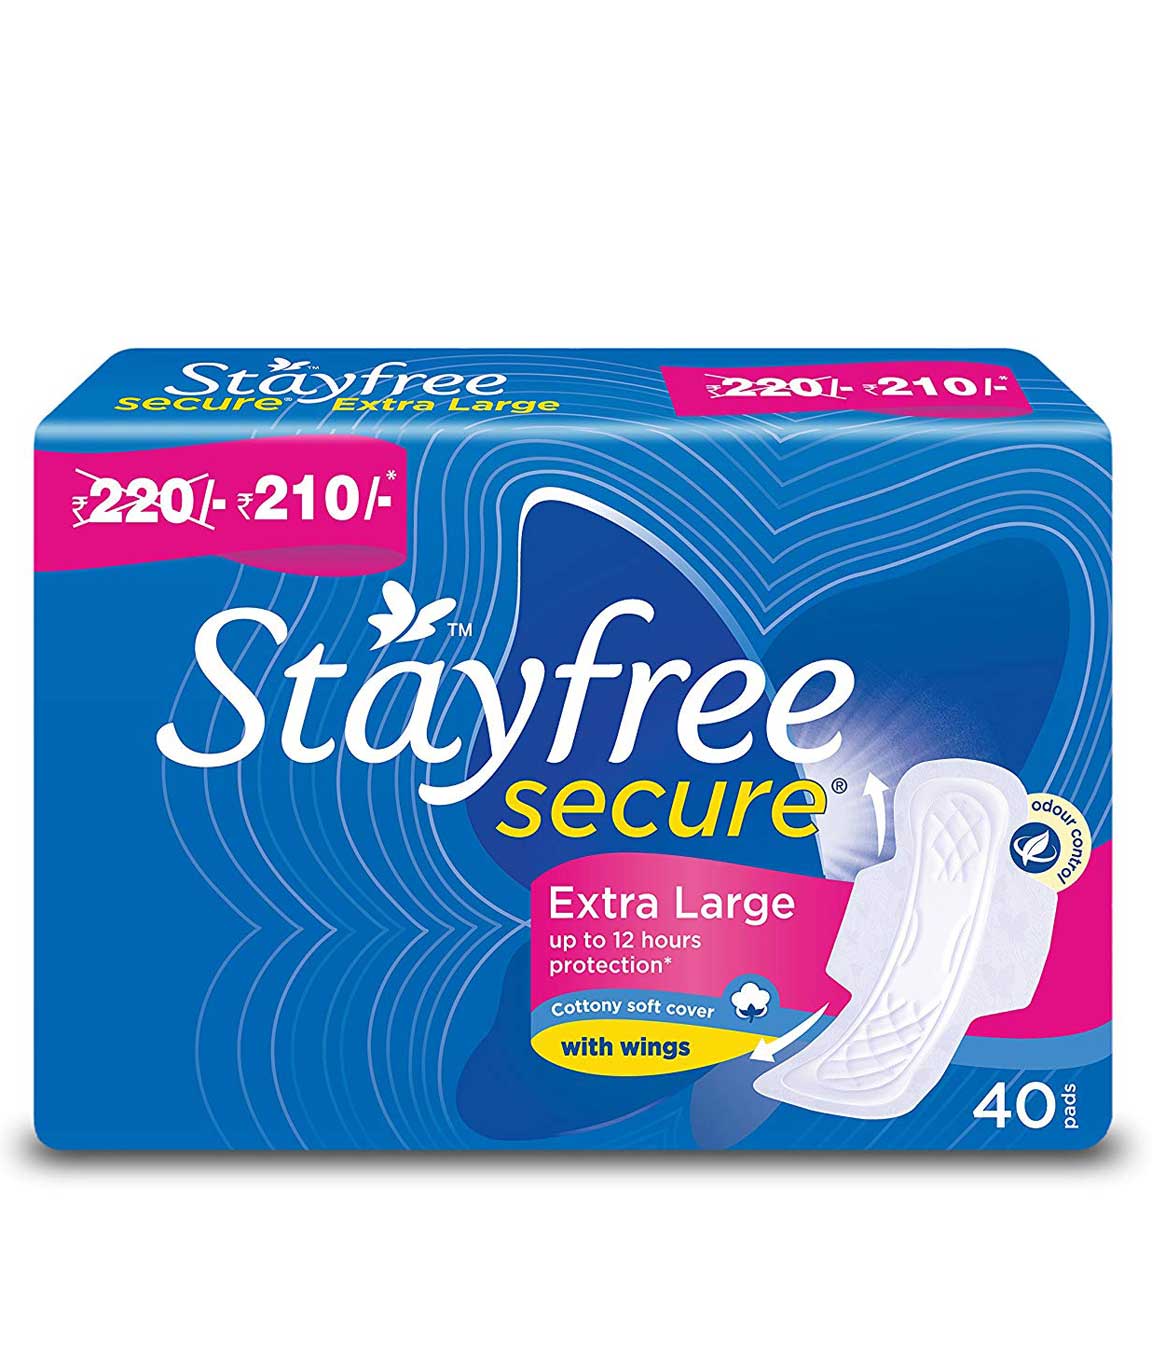 Stayfree Secure XL Cottony Sanitary napkins with Wings (40 Count)